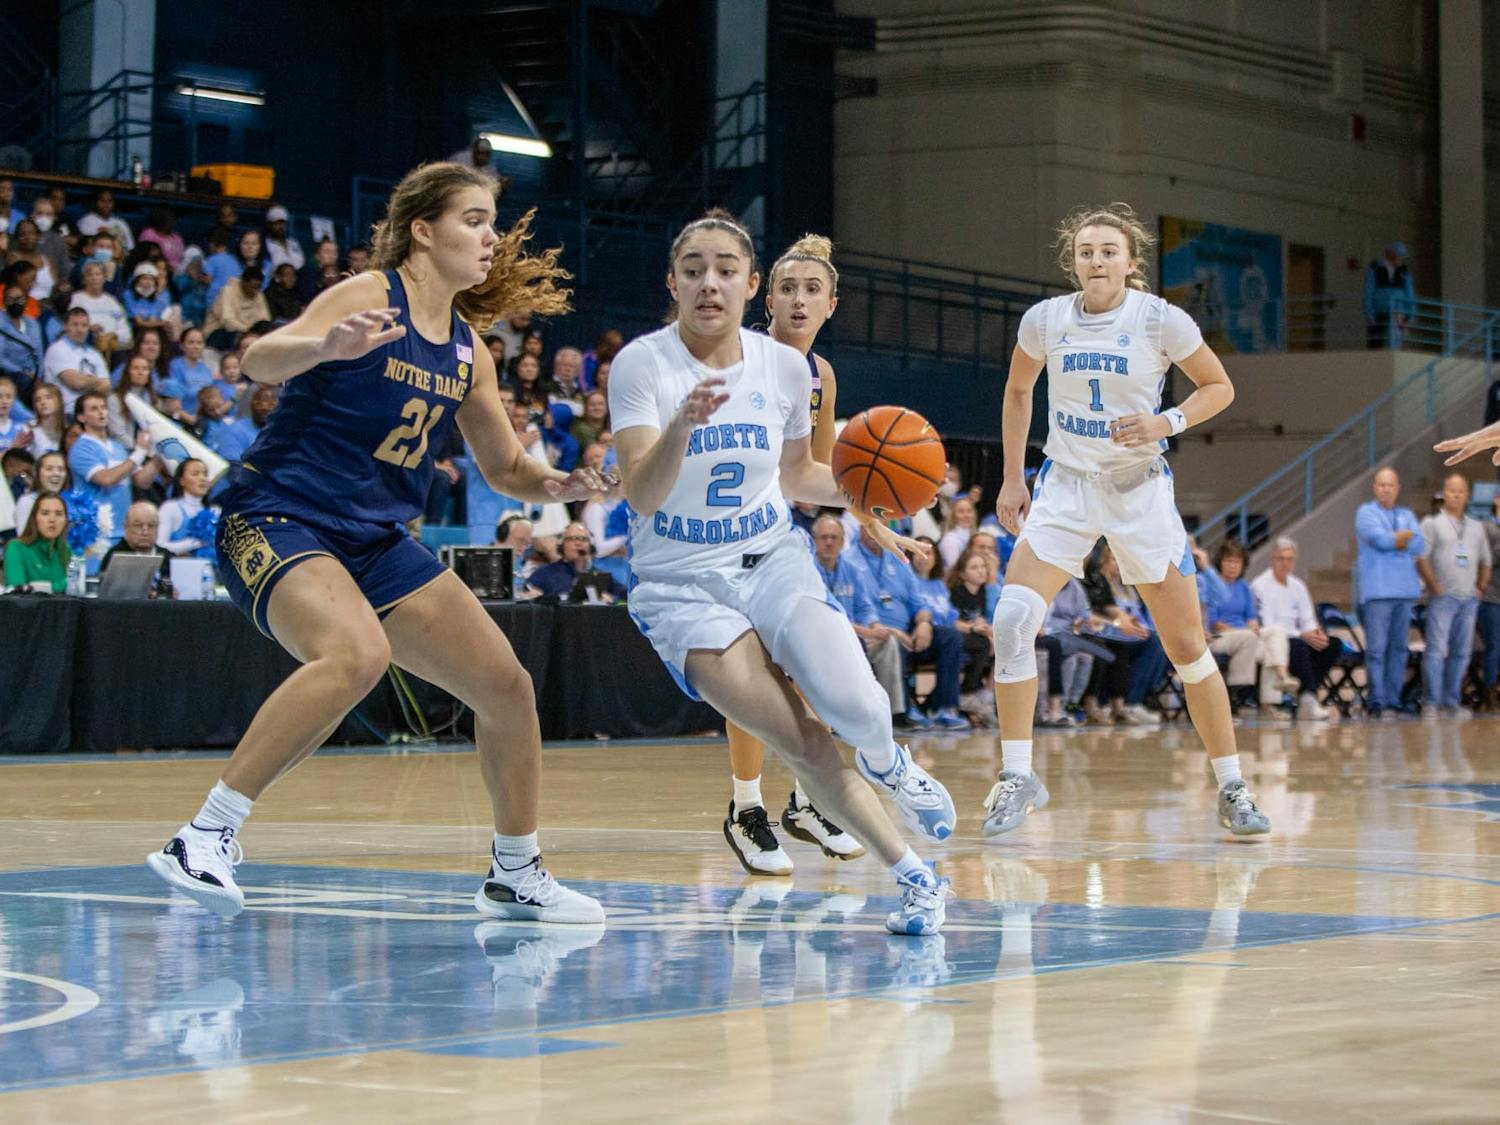 First-year guard Paulina Paris (2) dribbles during the women's basketball game against Notre Dame on Sunday, Jan. 8 at Carmichael Arena. UNC beat Notre Dame 60-50.